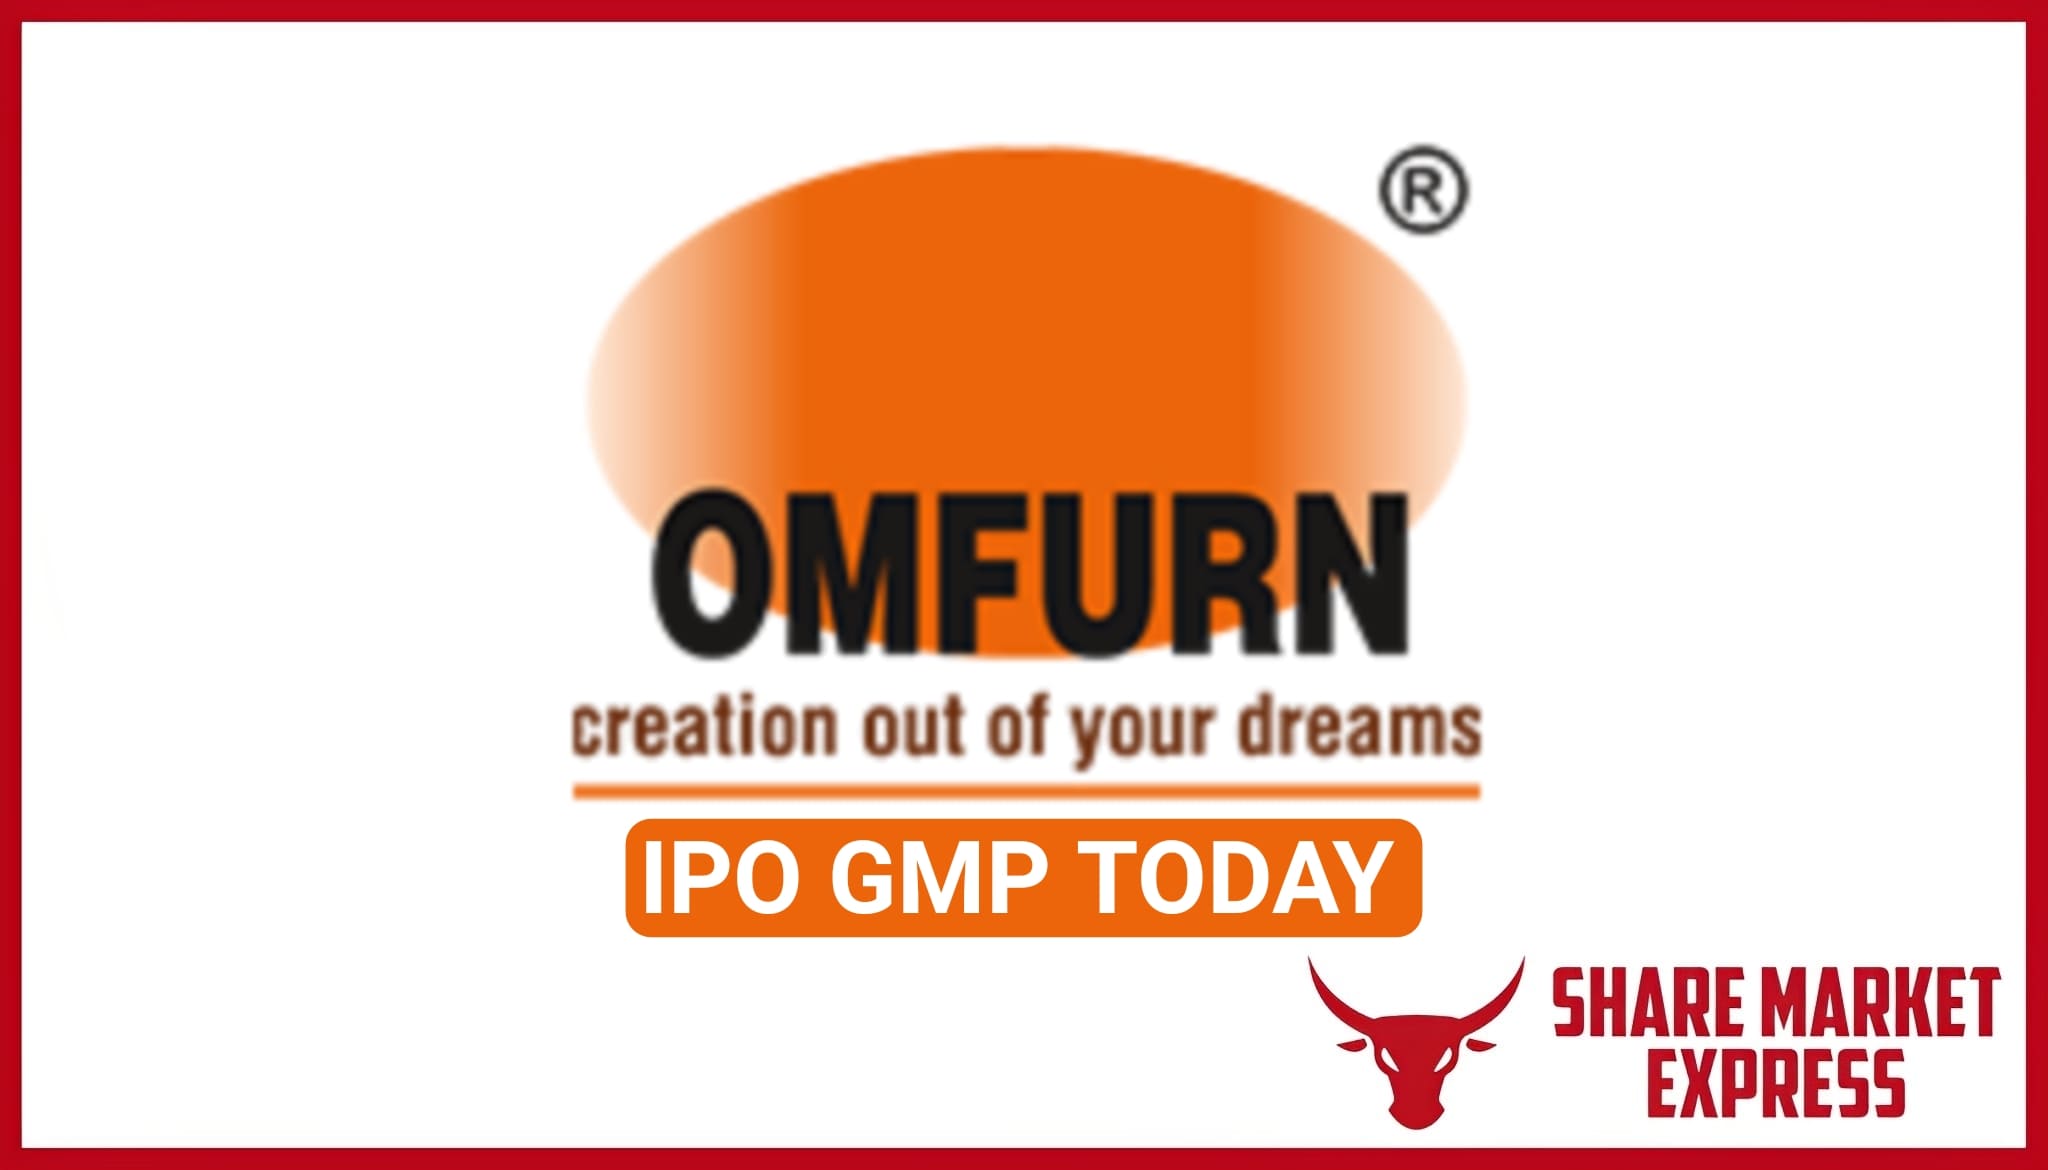 Omfurn India FPO GMP Today